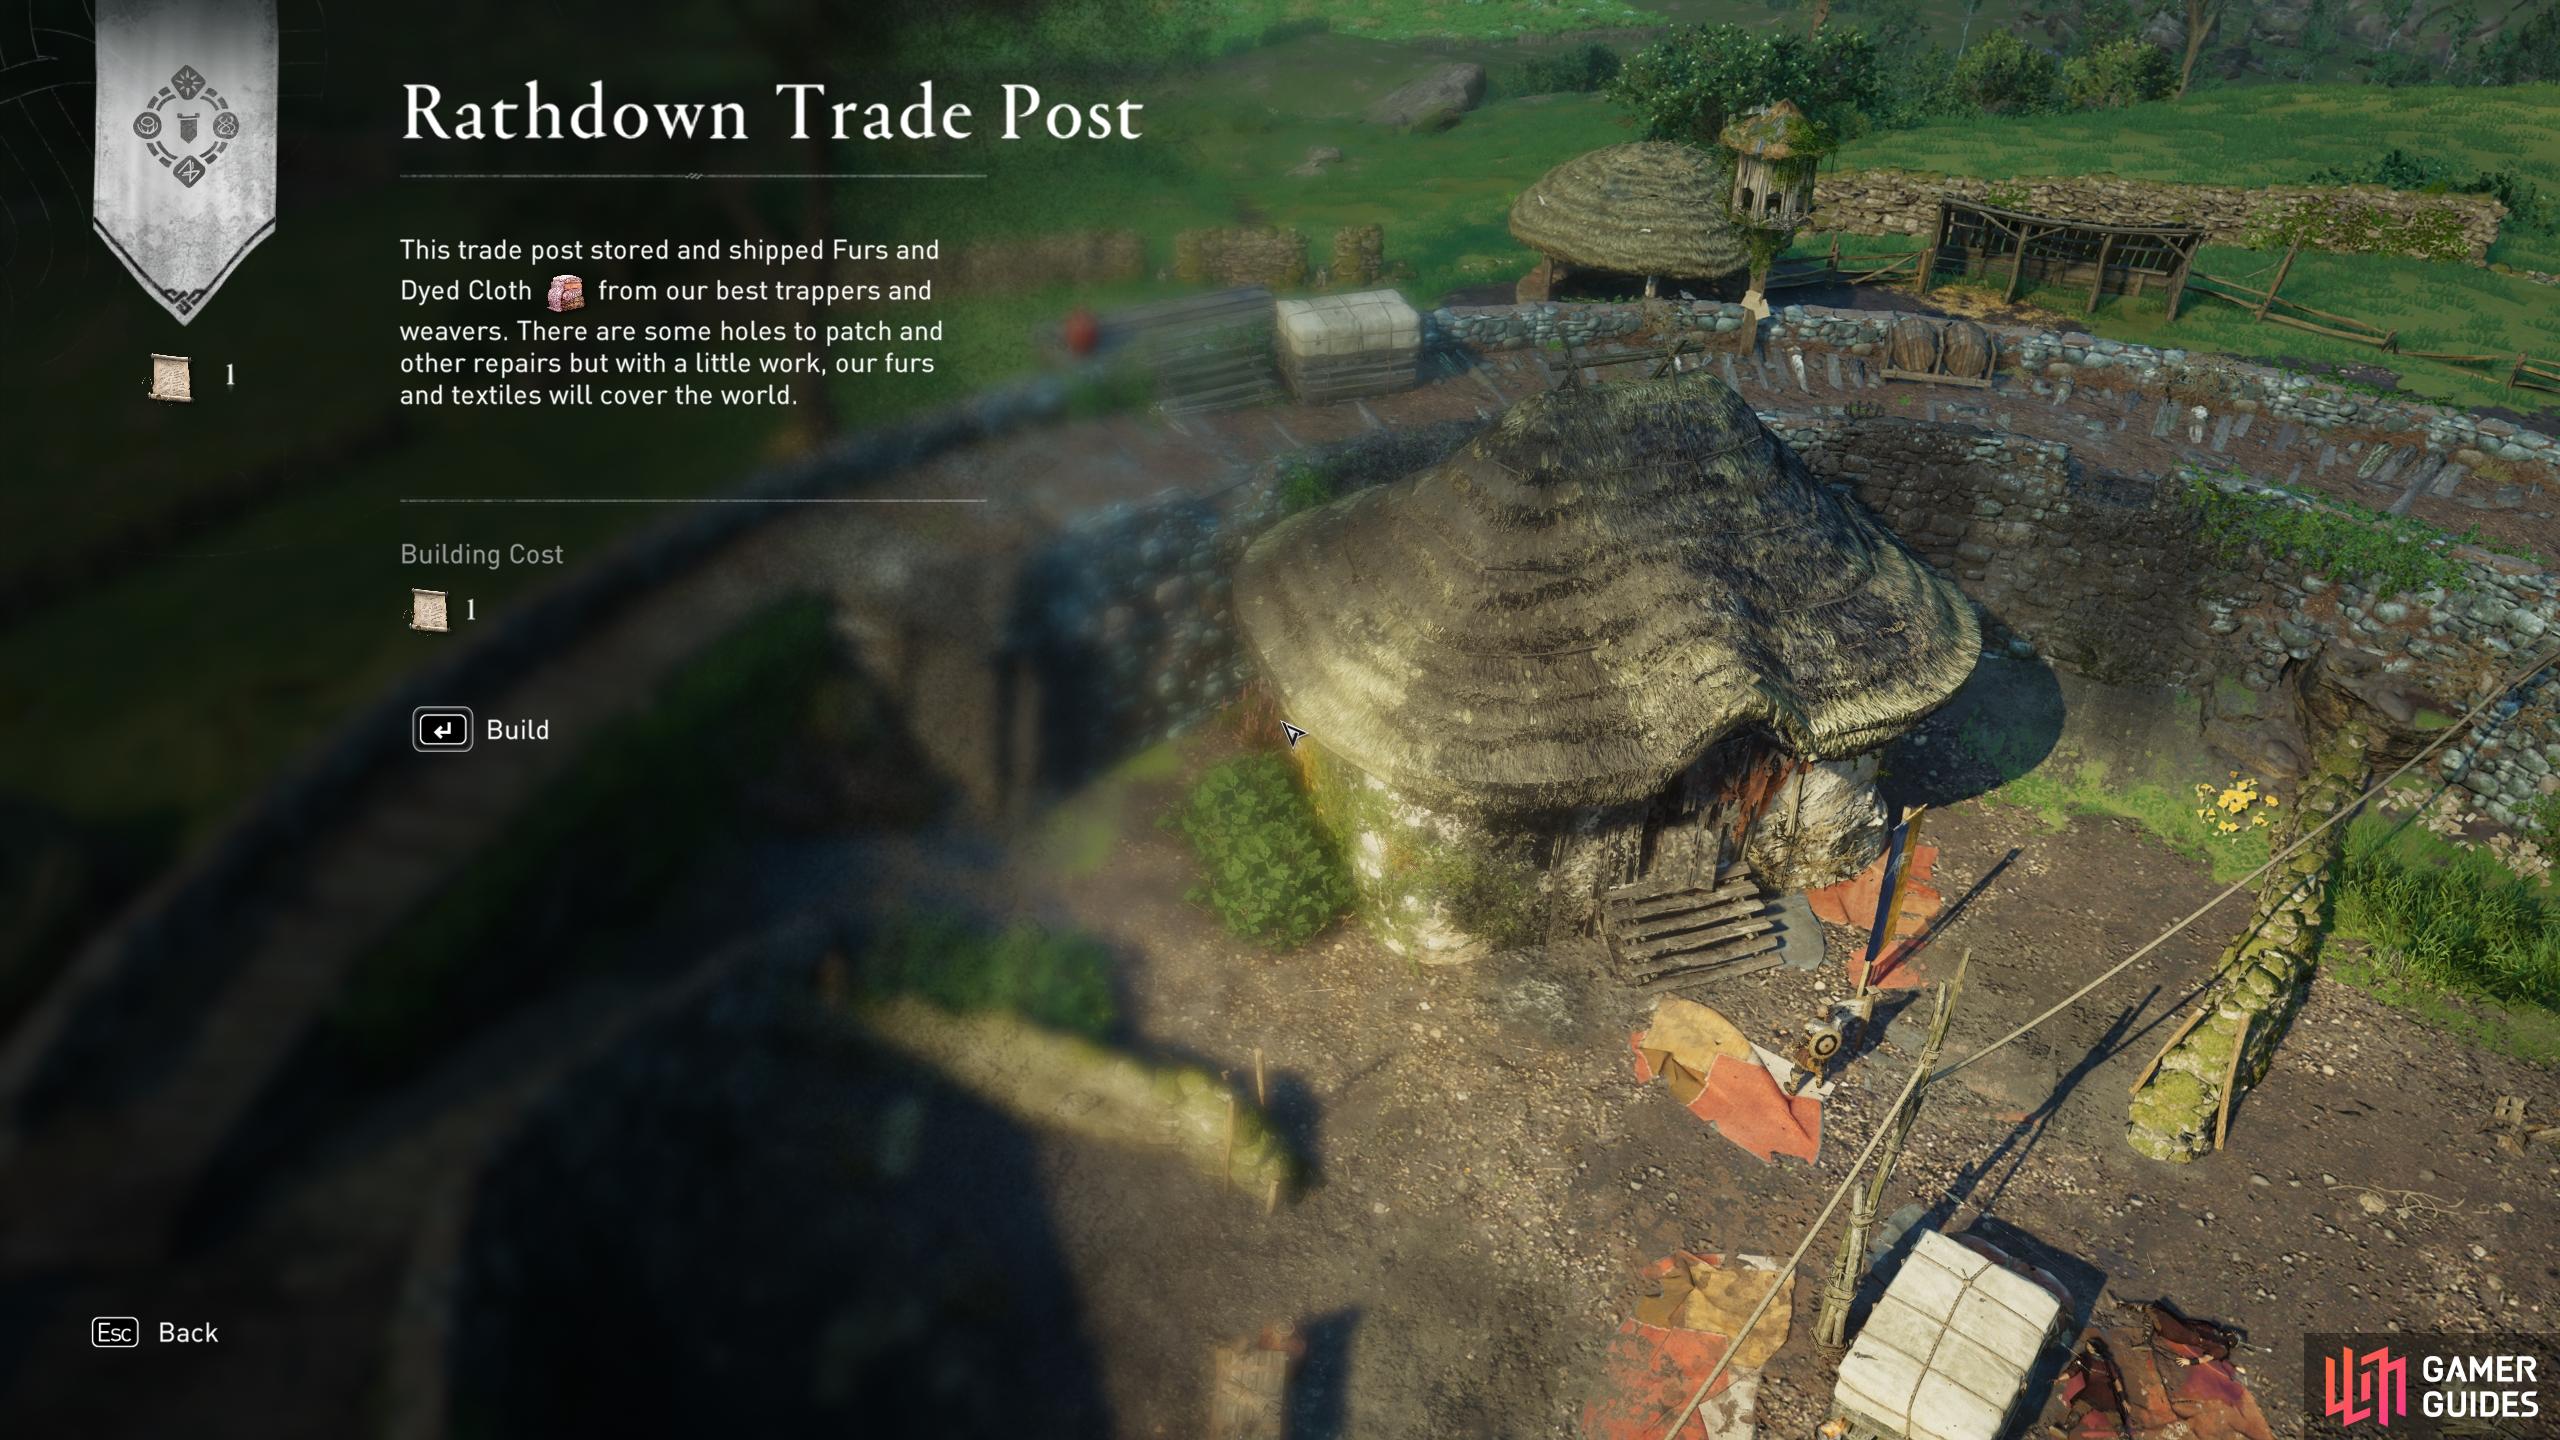 Build the Trade Post at Rathdown with the deed given to you by Azar.